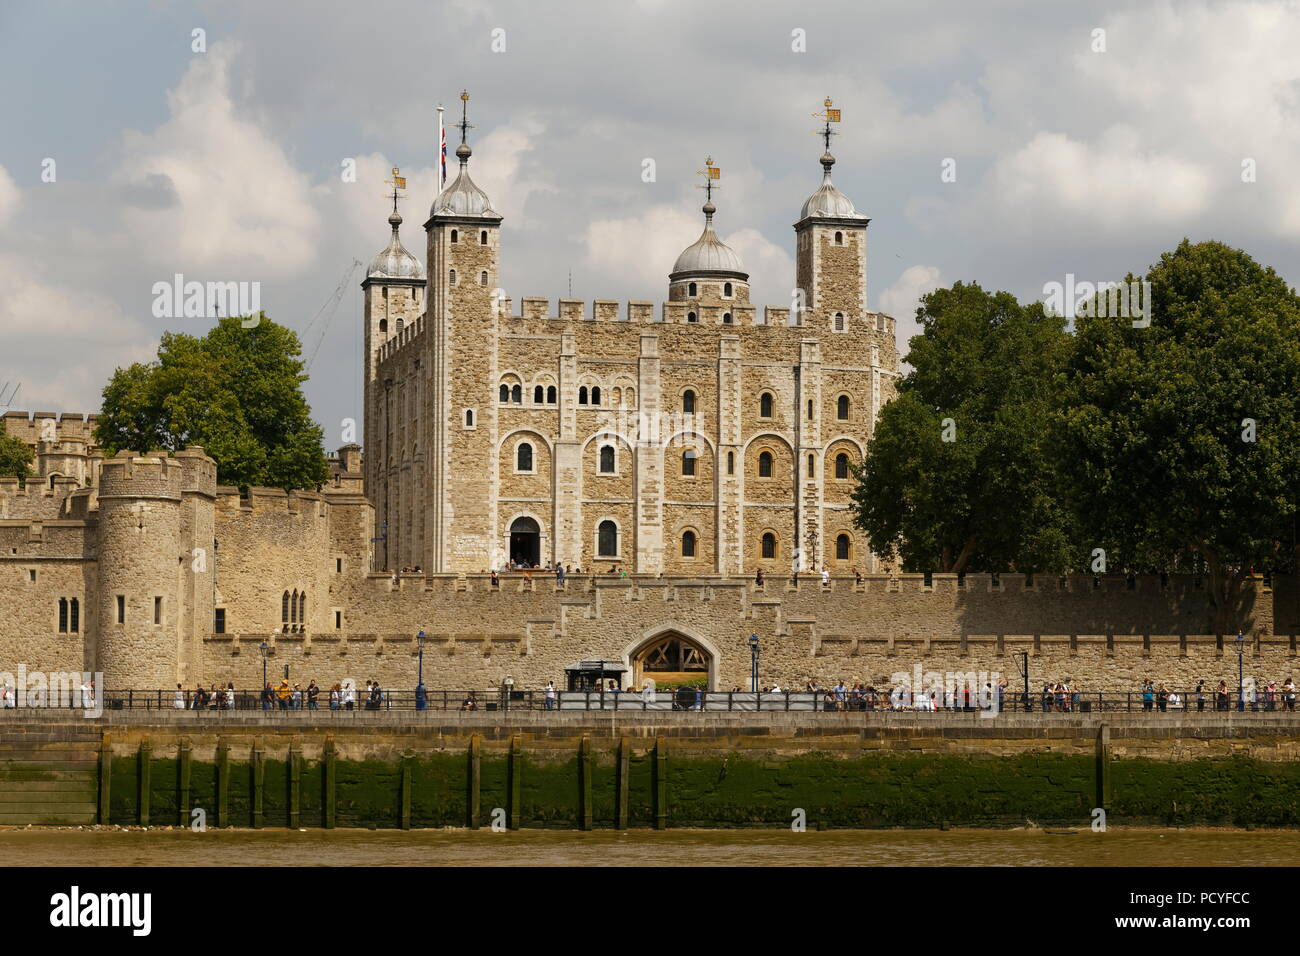 The Tower Of London from a Thames tour boat River Thames London Stock Photo